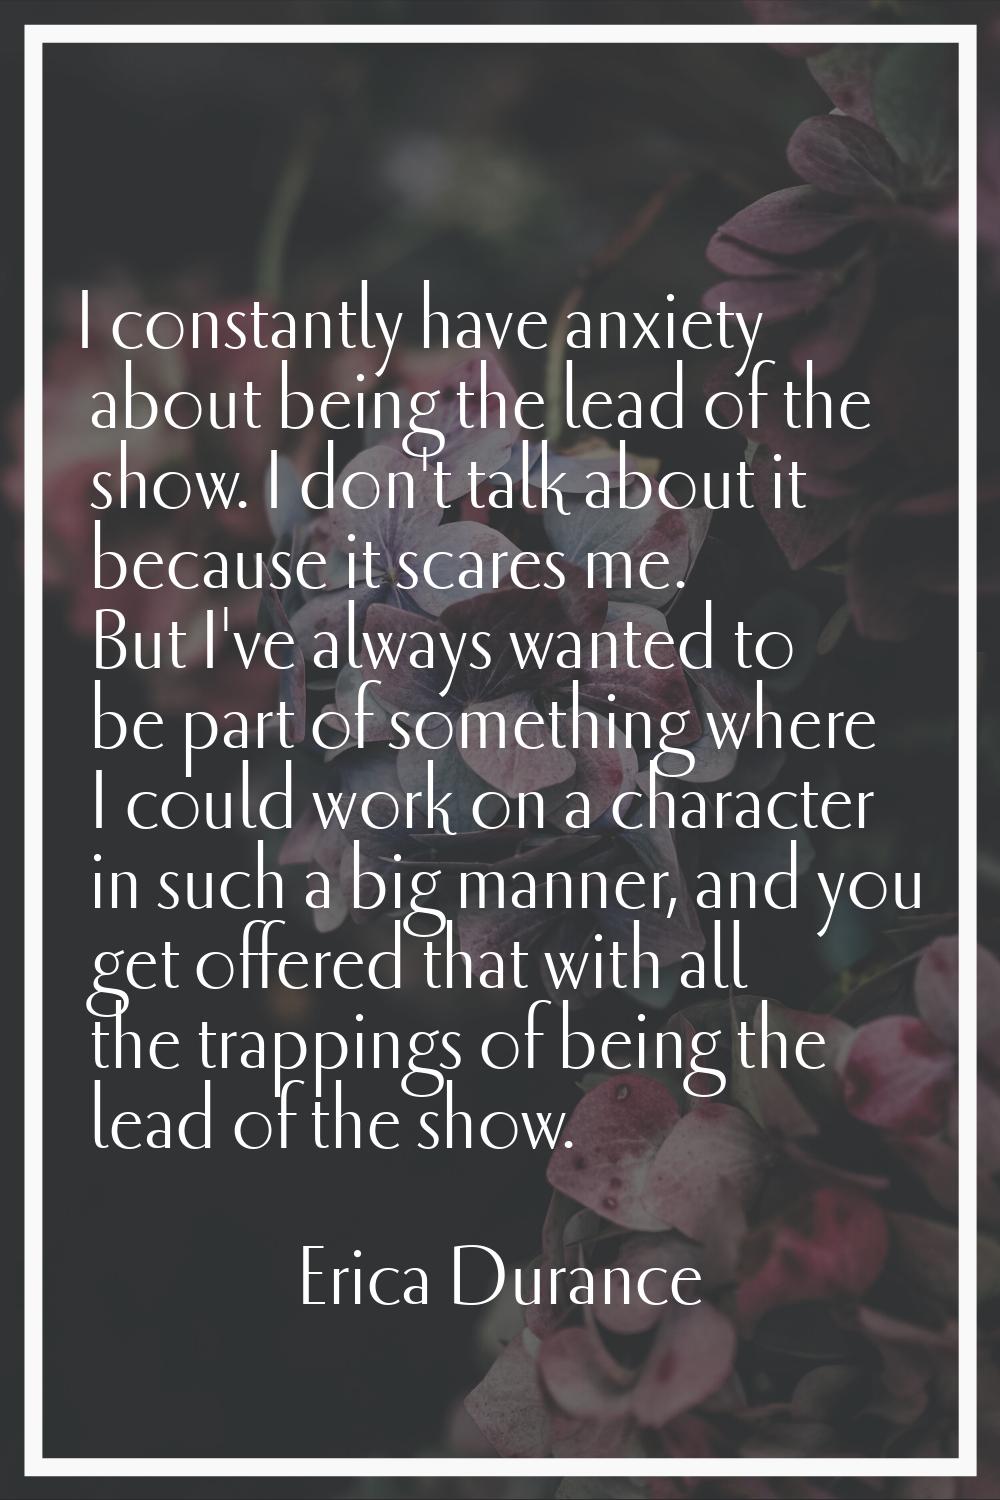 I constantly have anxiety about being the lead of the show. I don't talk about it because it scares